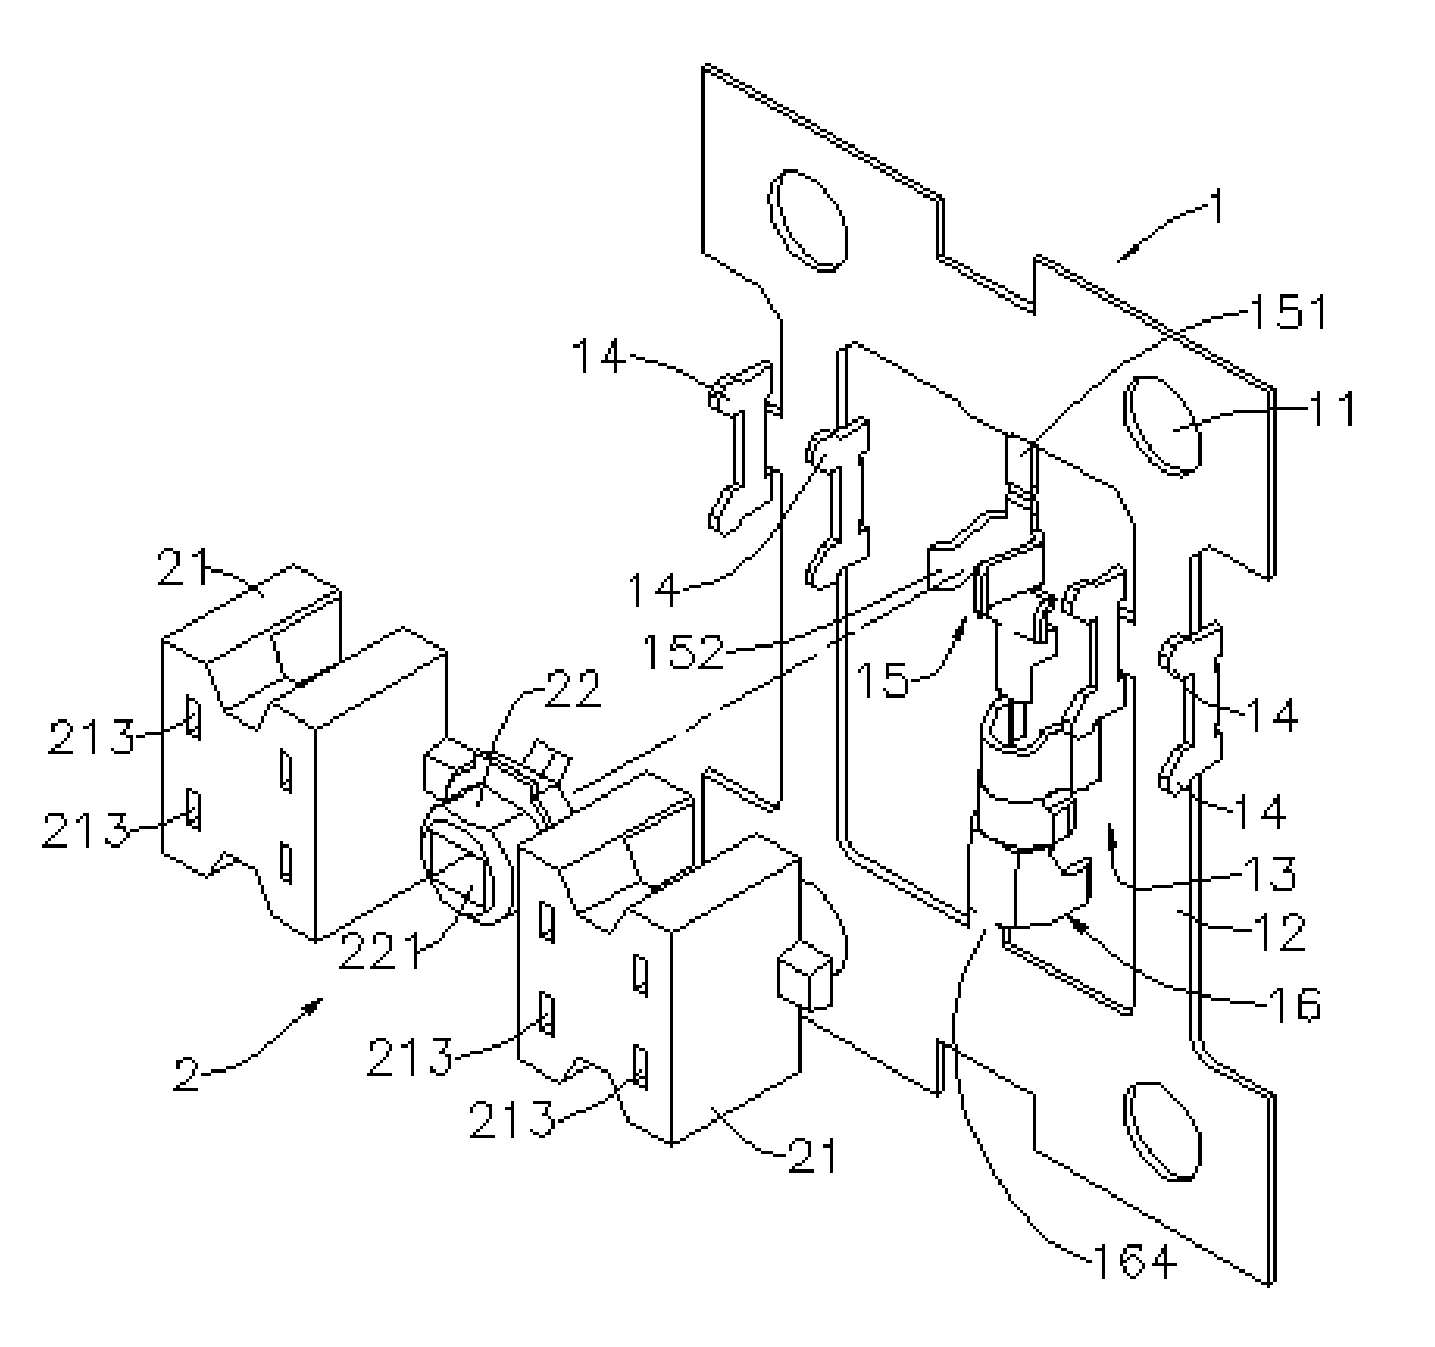 Structure of antenna connector